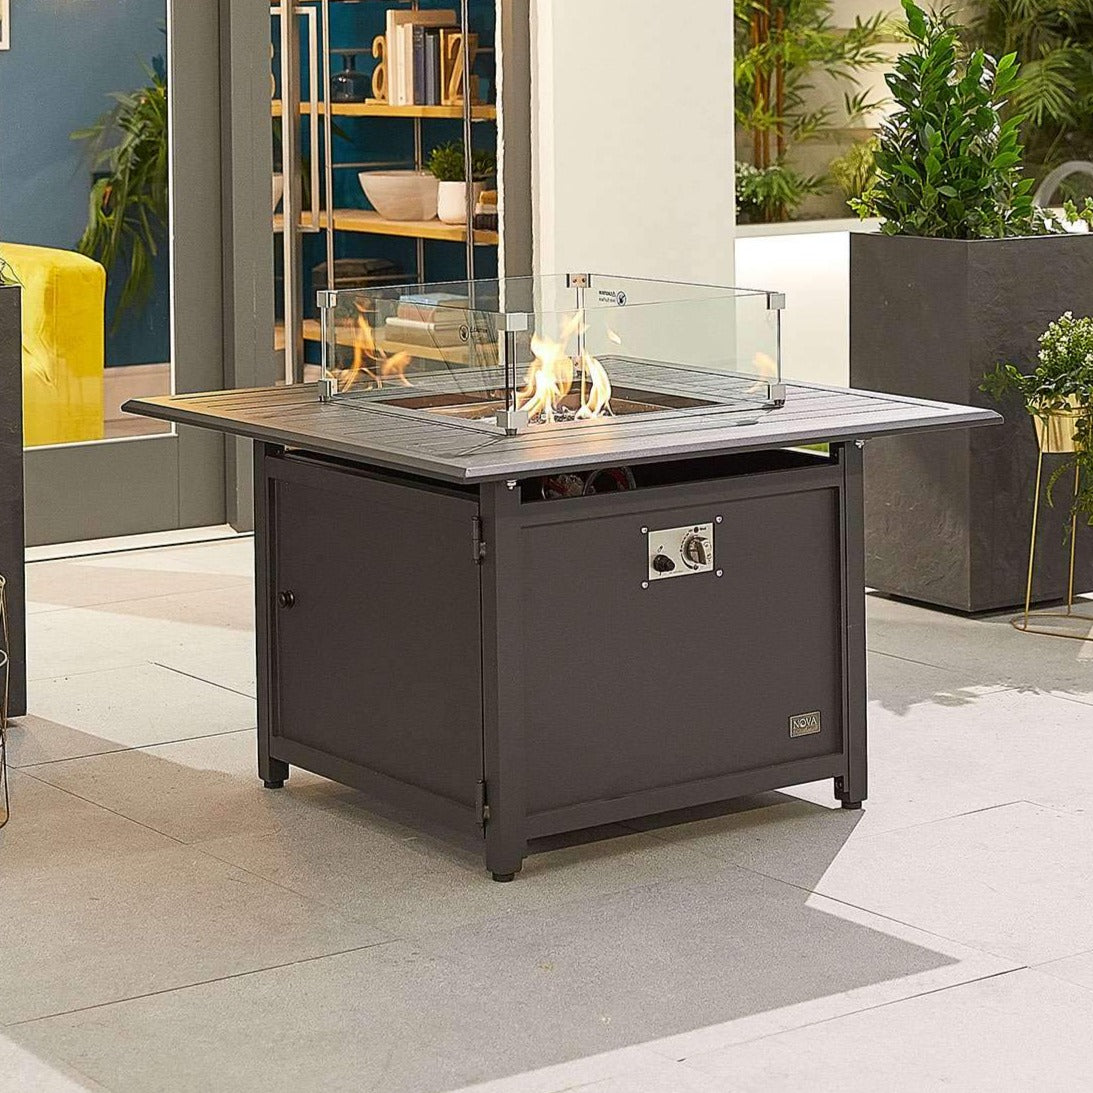 Square Outdoor Firepit Table - Mercury By Nova